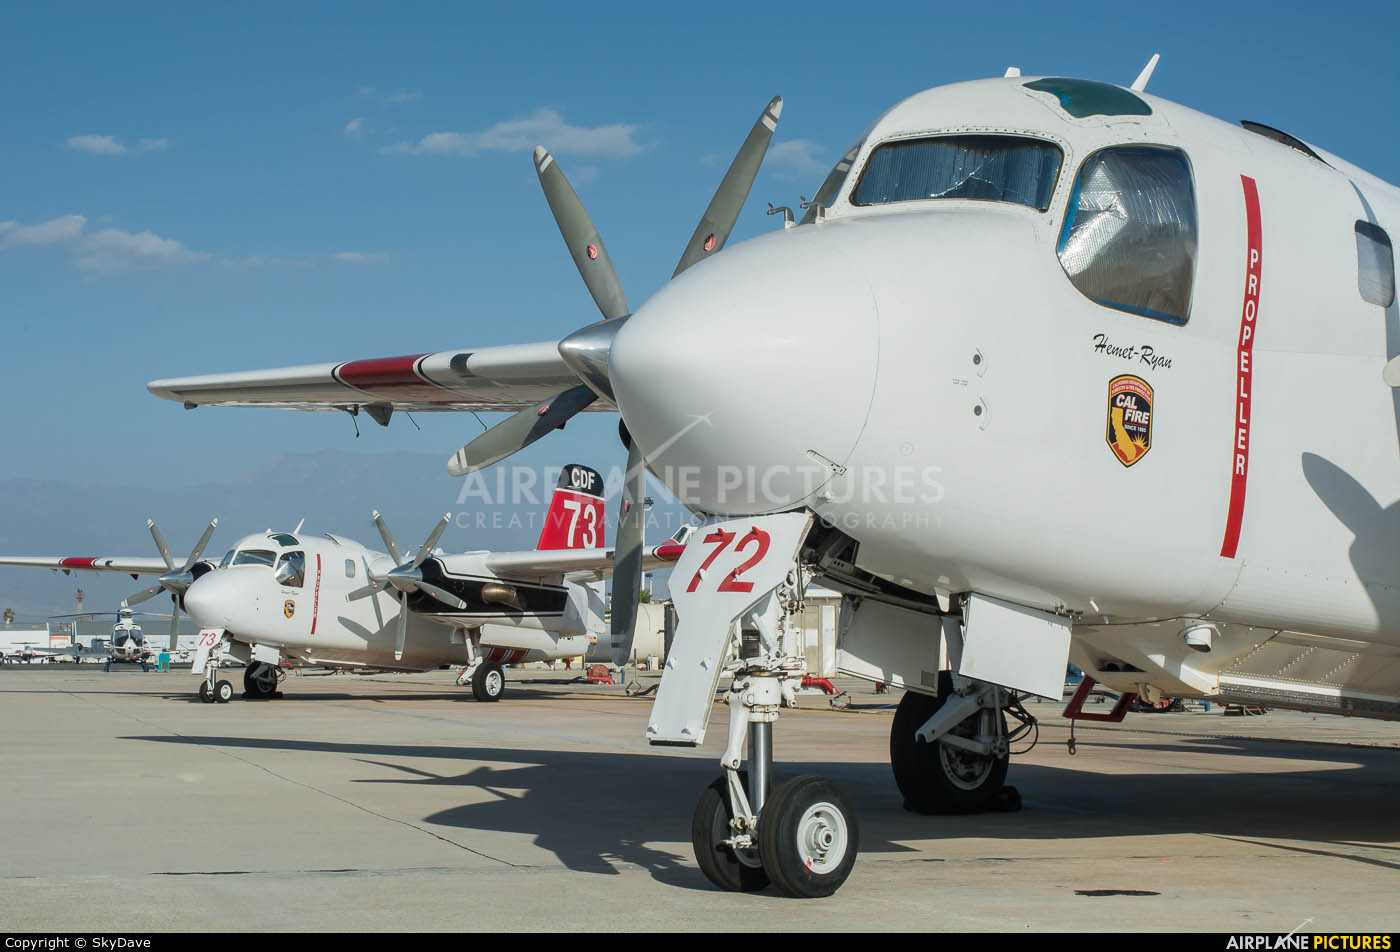 California - Dept. of Forestry & Fire Protection N435DF aircraft at Hemet, CA